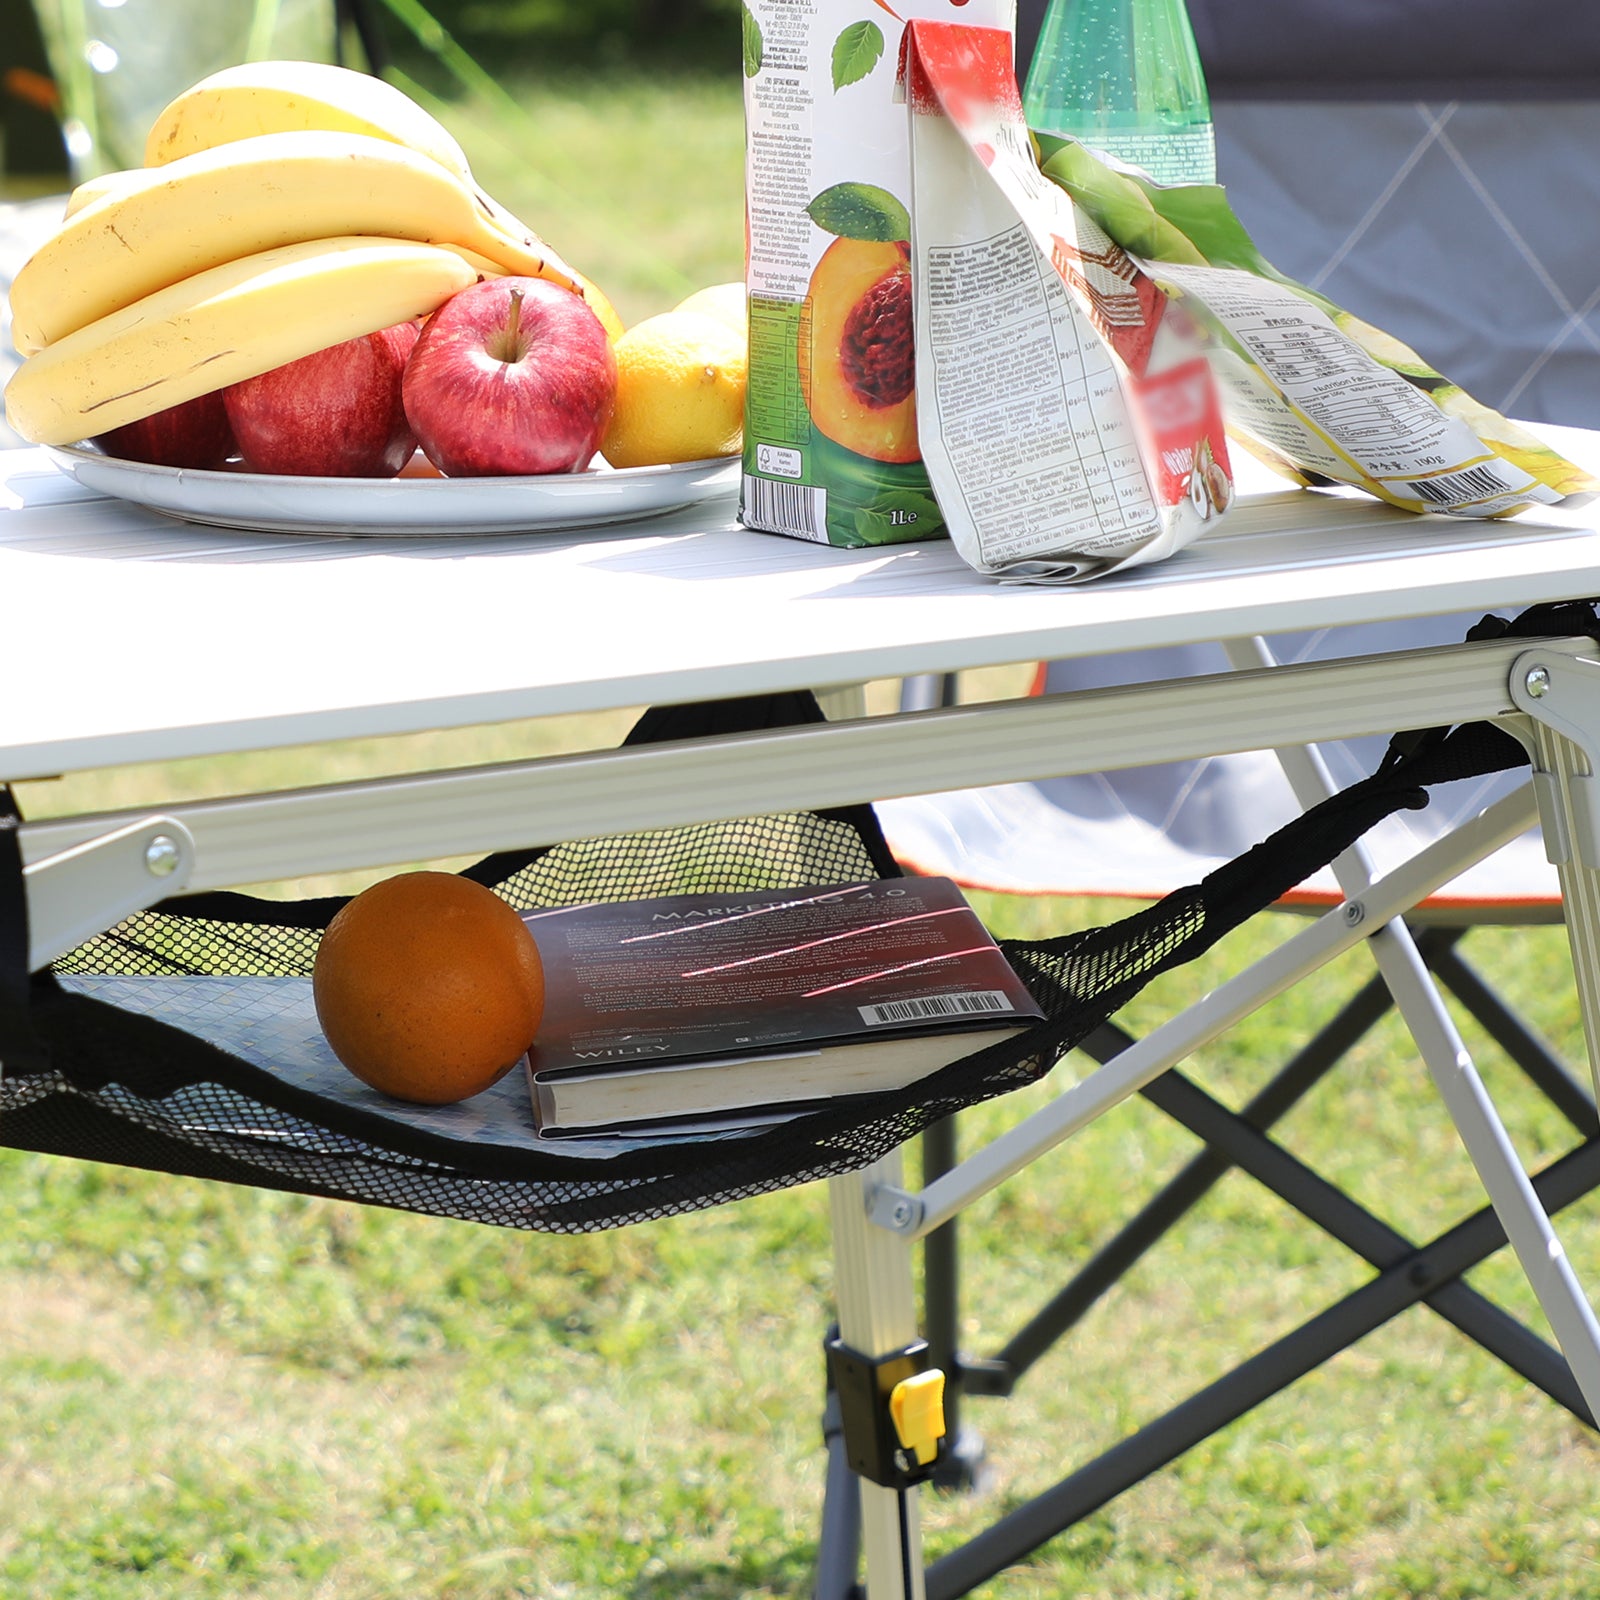 Portal Outdoors Quick Adjust Roll-Up Table